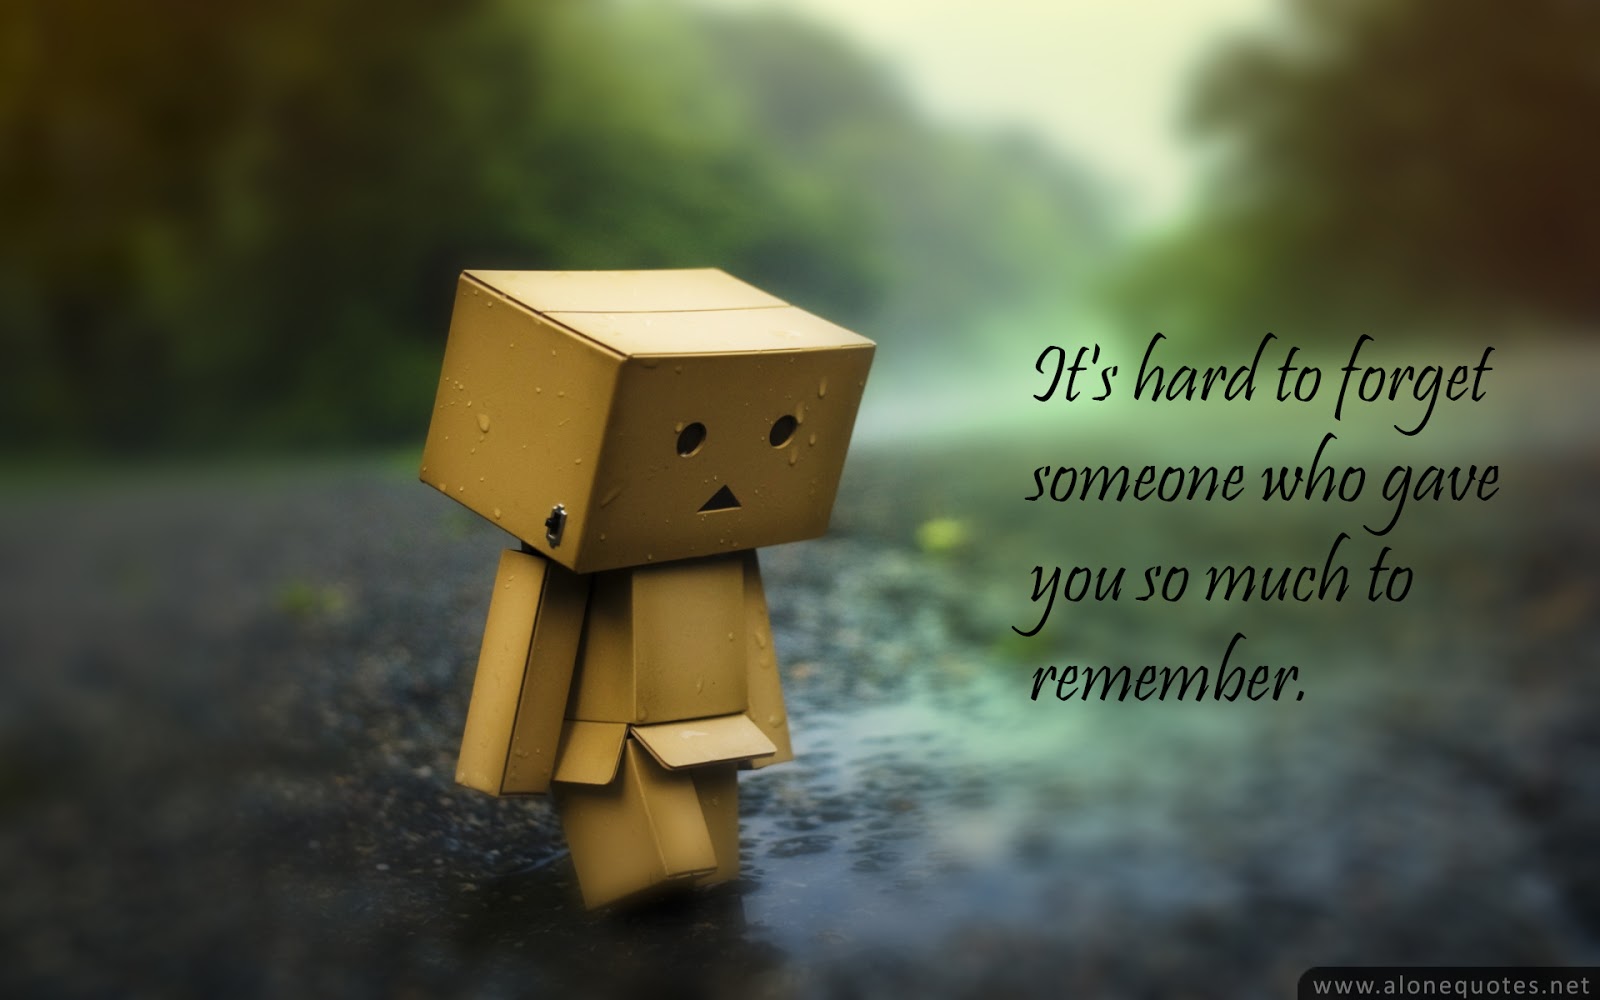 sad alone love wallpapers with quotes download 2013 sad 1600x1000